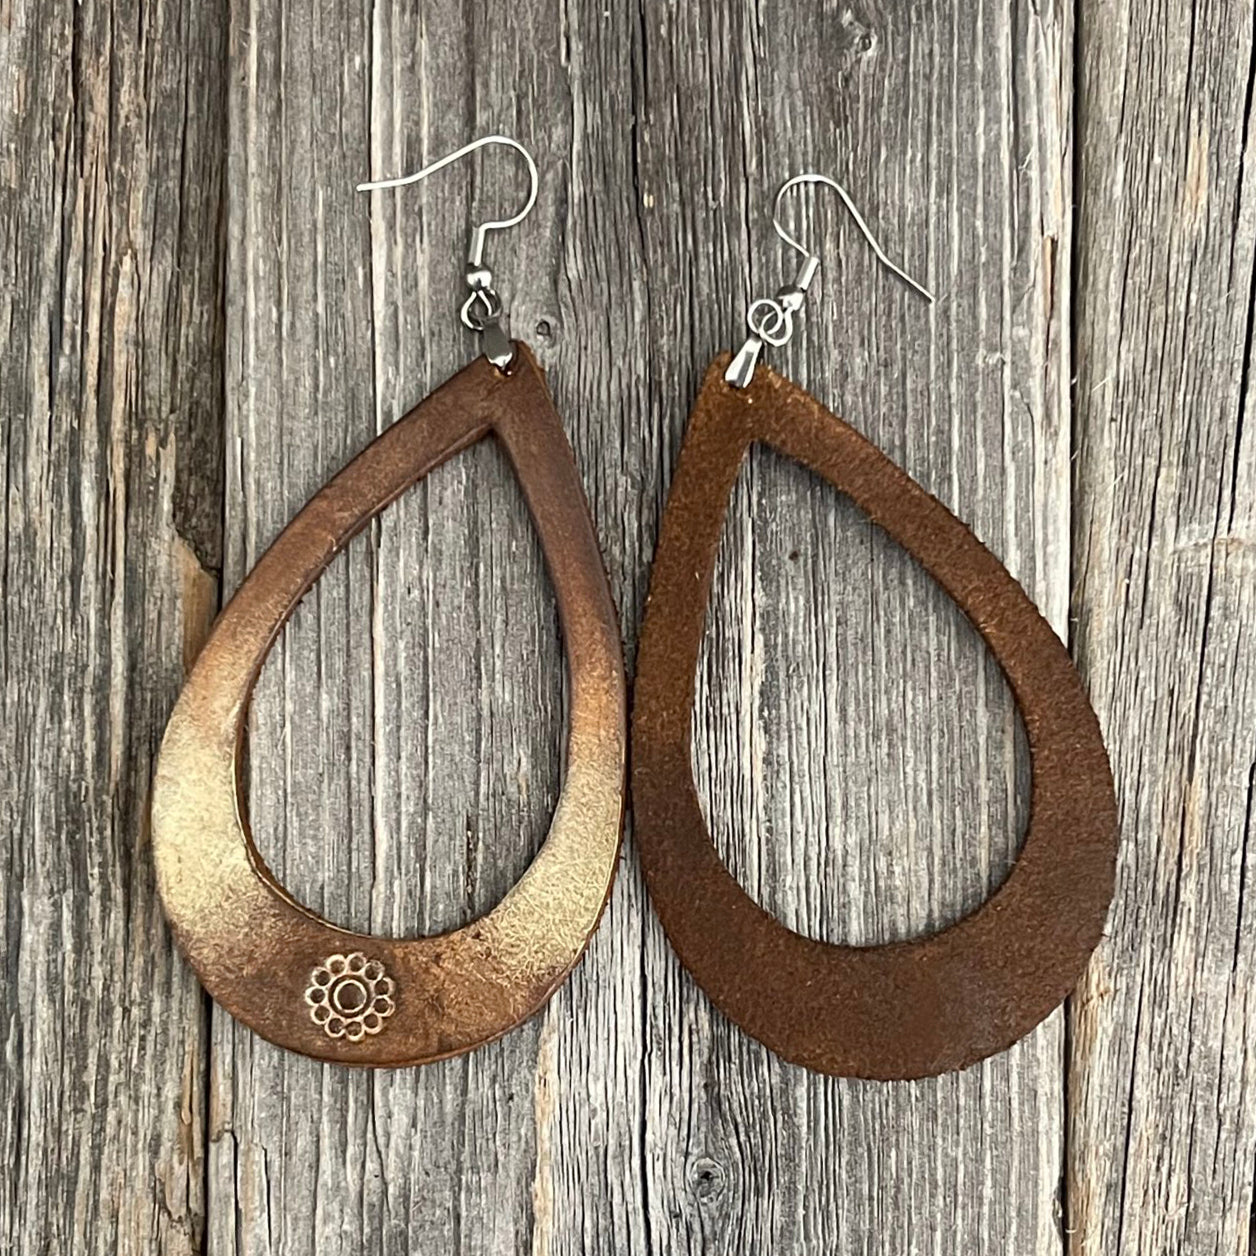 MADE TO ORDER - Handmade Ombre Leather Drop Boho Earrings